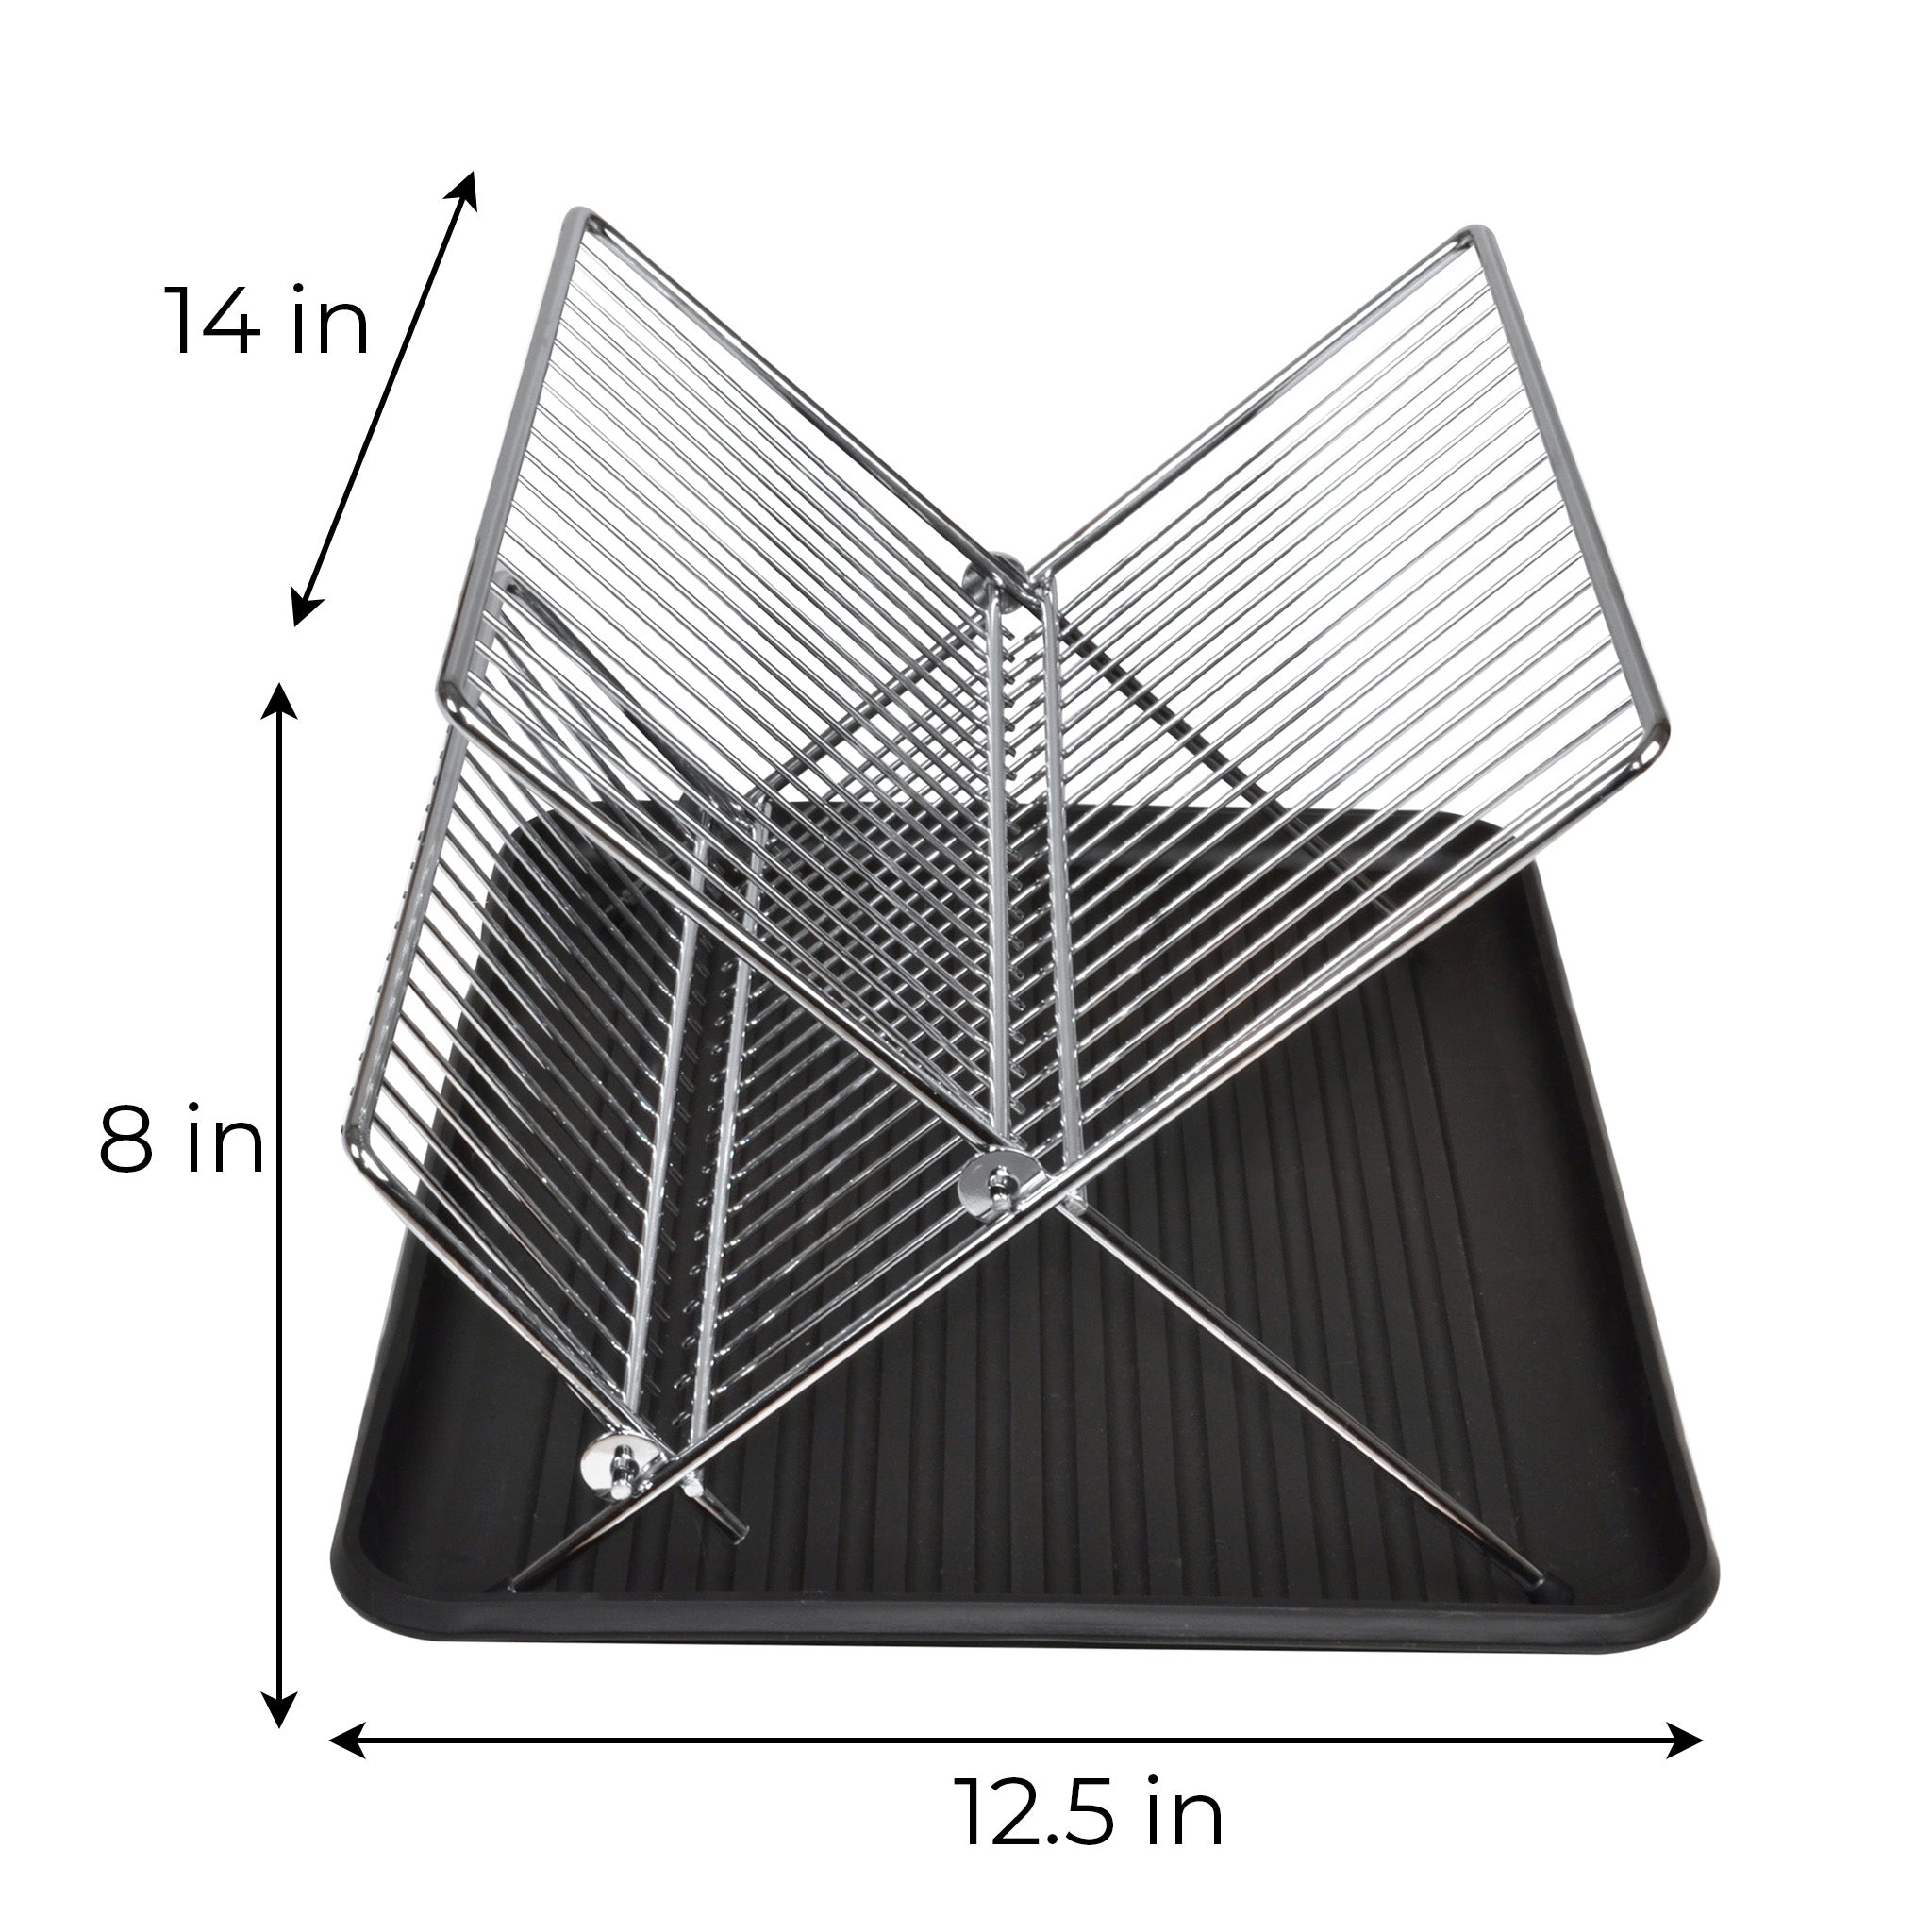 Dish Drainer Rack with In-Sink or Counter Drying - Chrome - Smart Design® 5